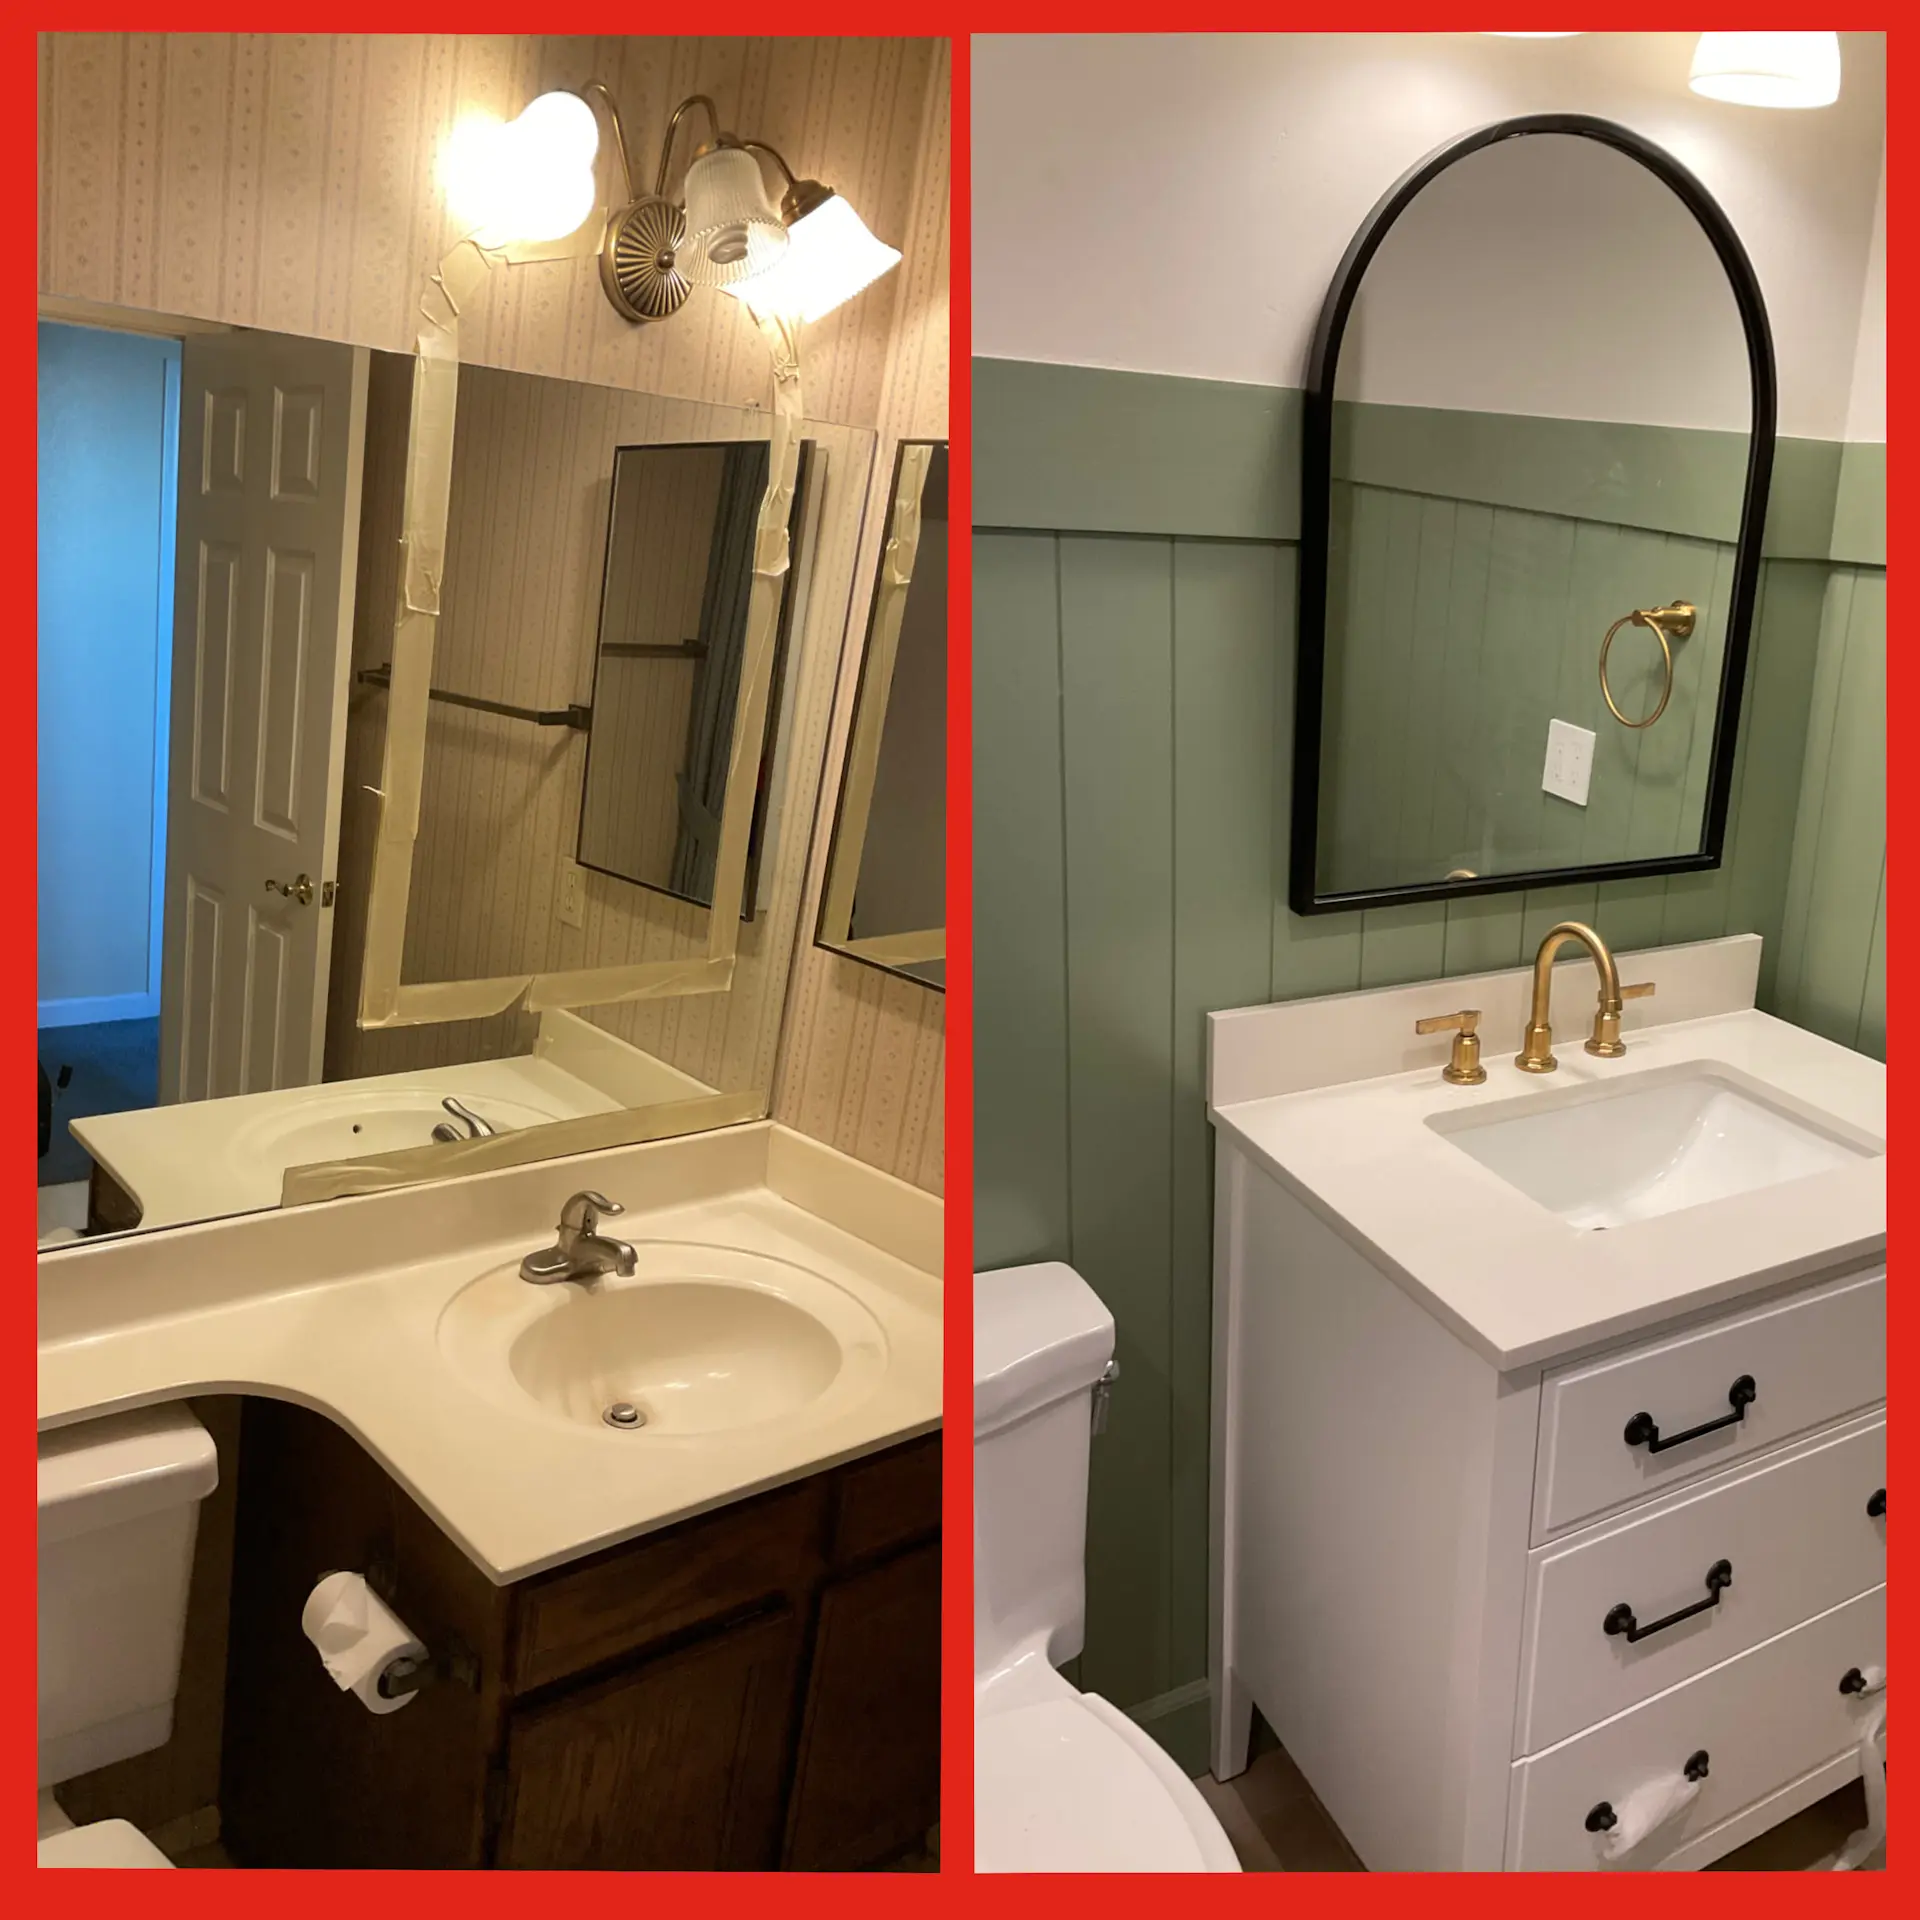 Before and after photo showcasing new vanity, sink, and mirror during bathroom remodeling service from Mr. Handyman.